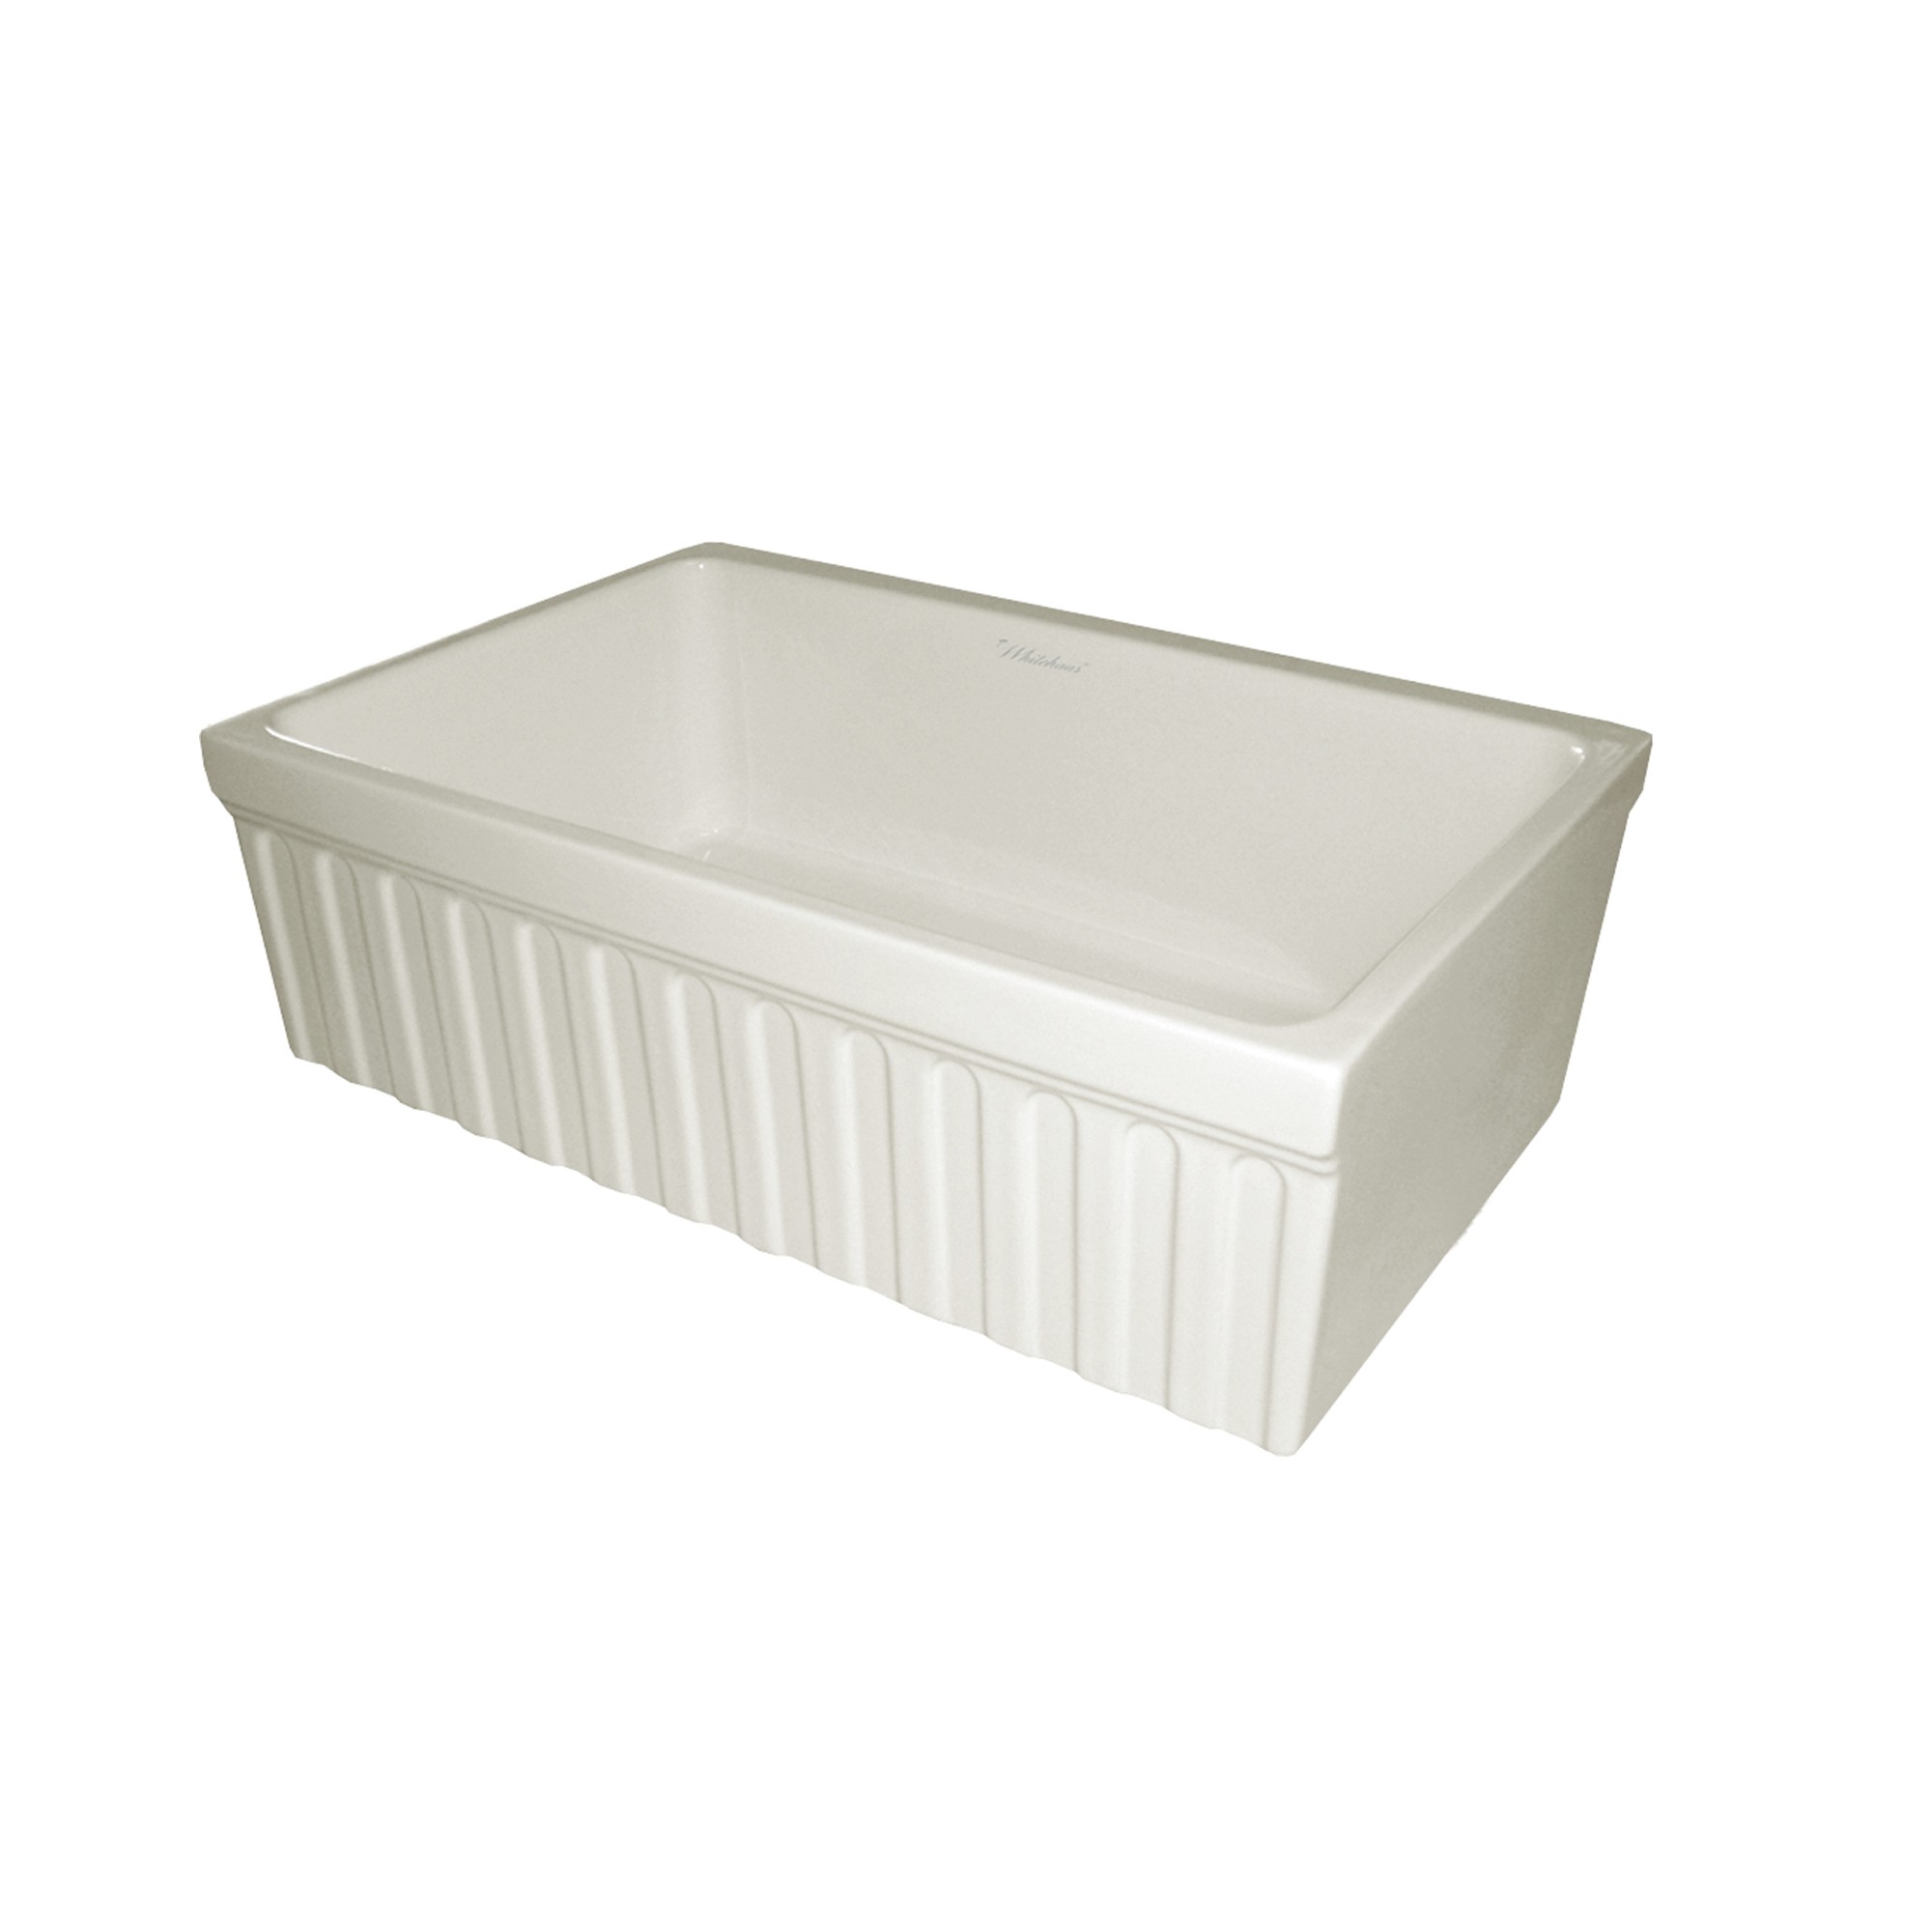 Farmhaus Fireclay Quatro Alcove Reversible Sink with a Fluted Front Apron and Decorative 2 1/2" Lip on One Side and 2" Lip on th